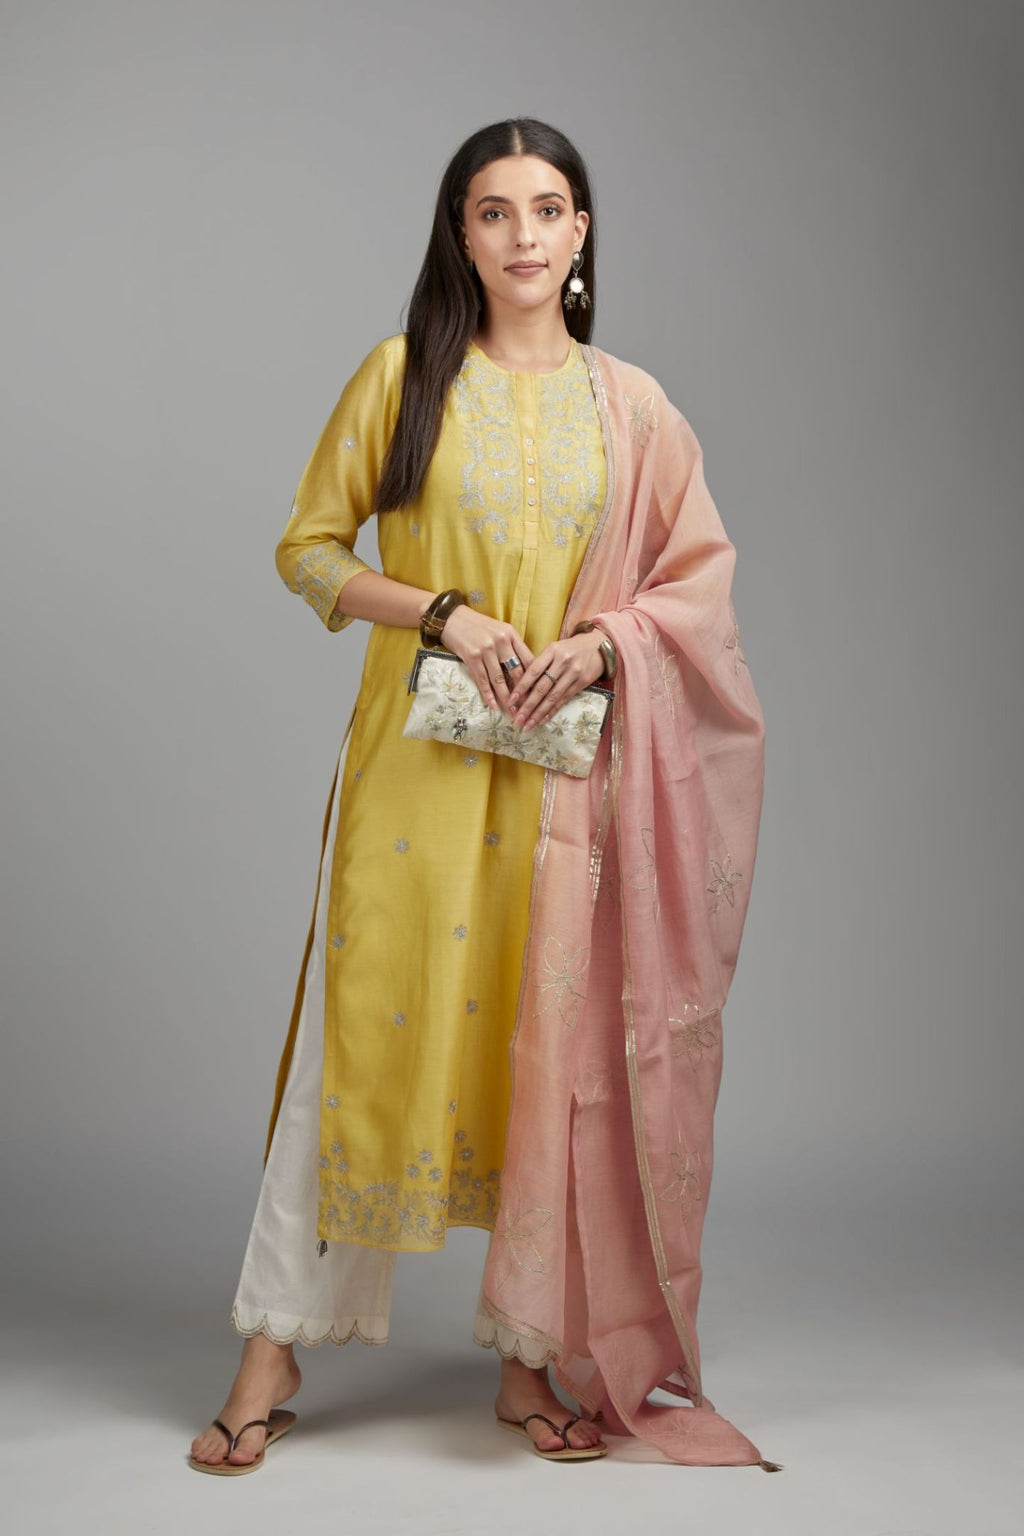 Yellow straight kurta set with silver zari embroidery and round neckline with button placket in the front